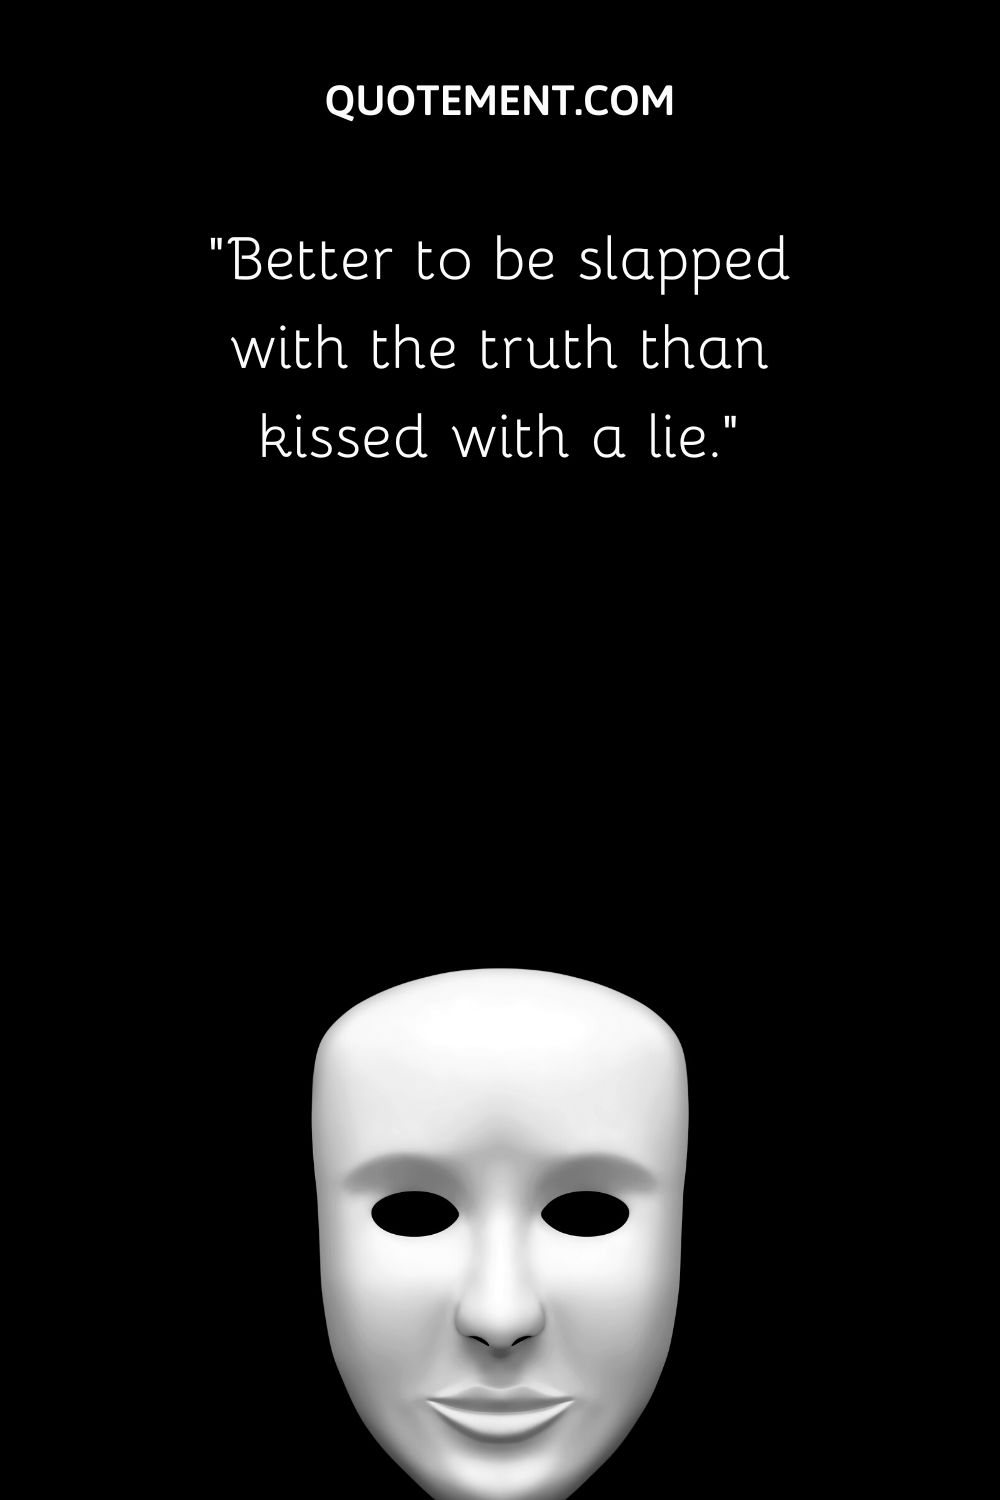 Better to be slapped with the truth than kissed with a lie.